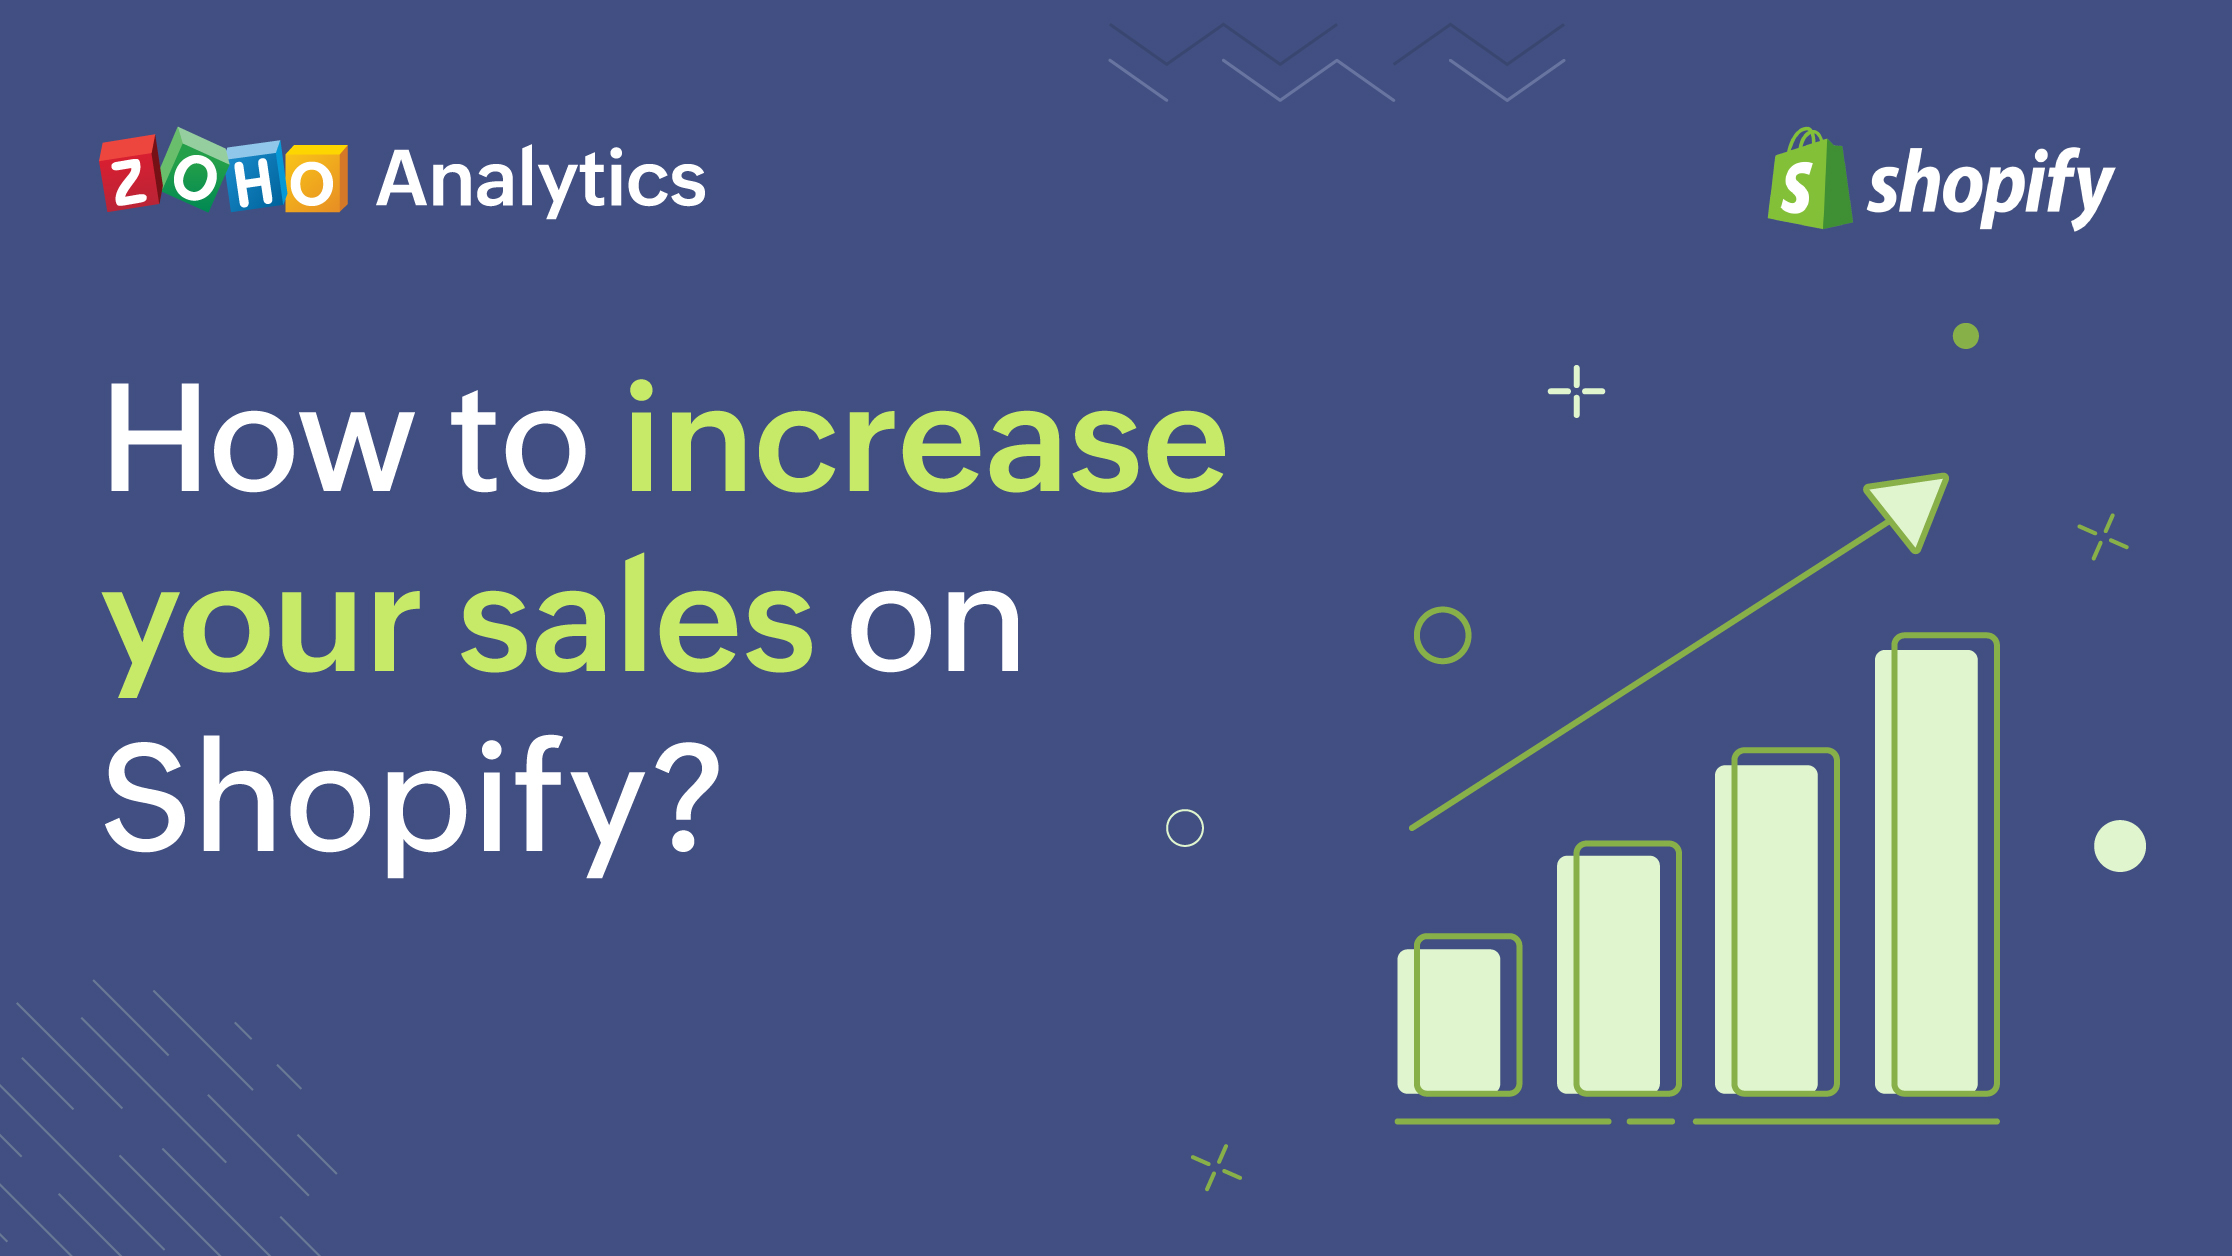 How to increase your sales on Shopify